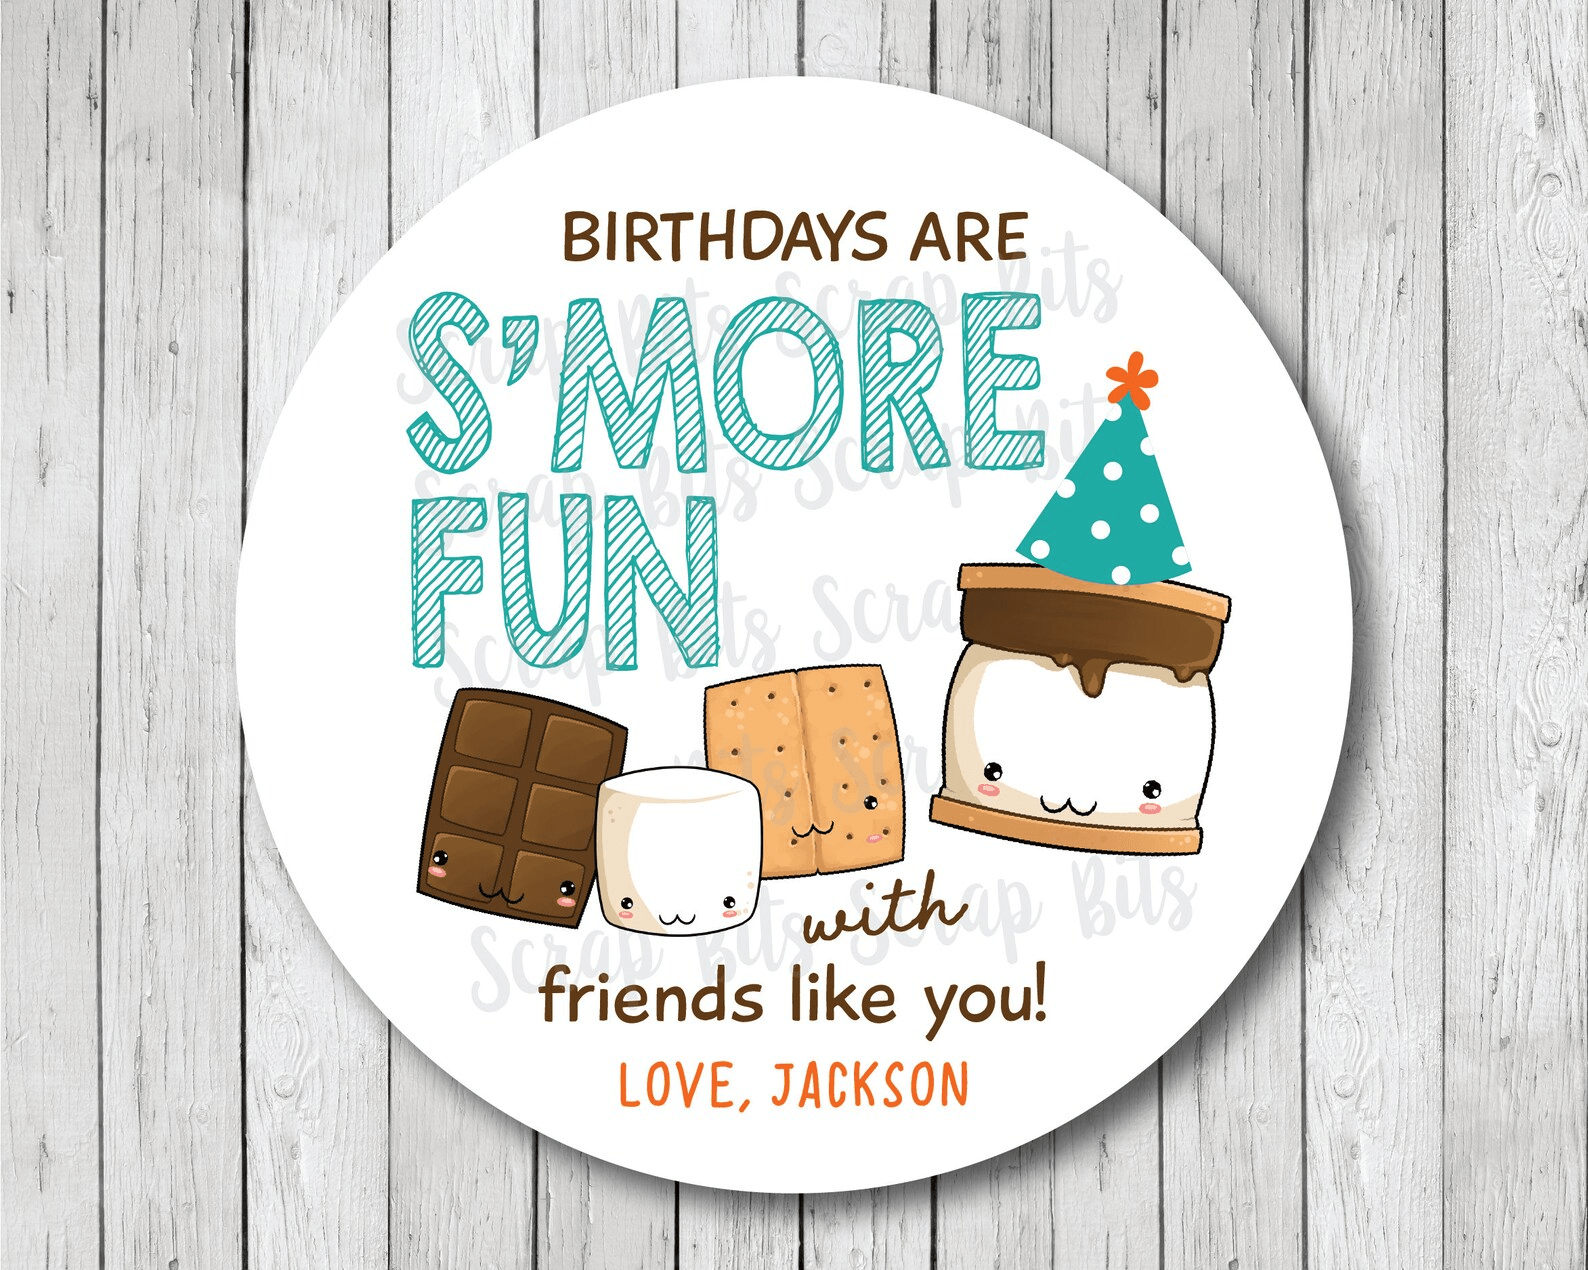 Birthdays Are S'more Fun, Smore Birthday Favor Stickers or Tags - Scrap Bits